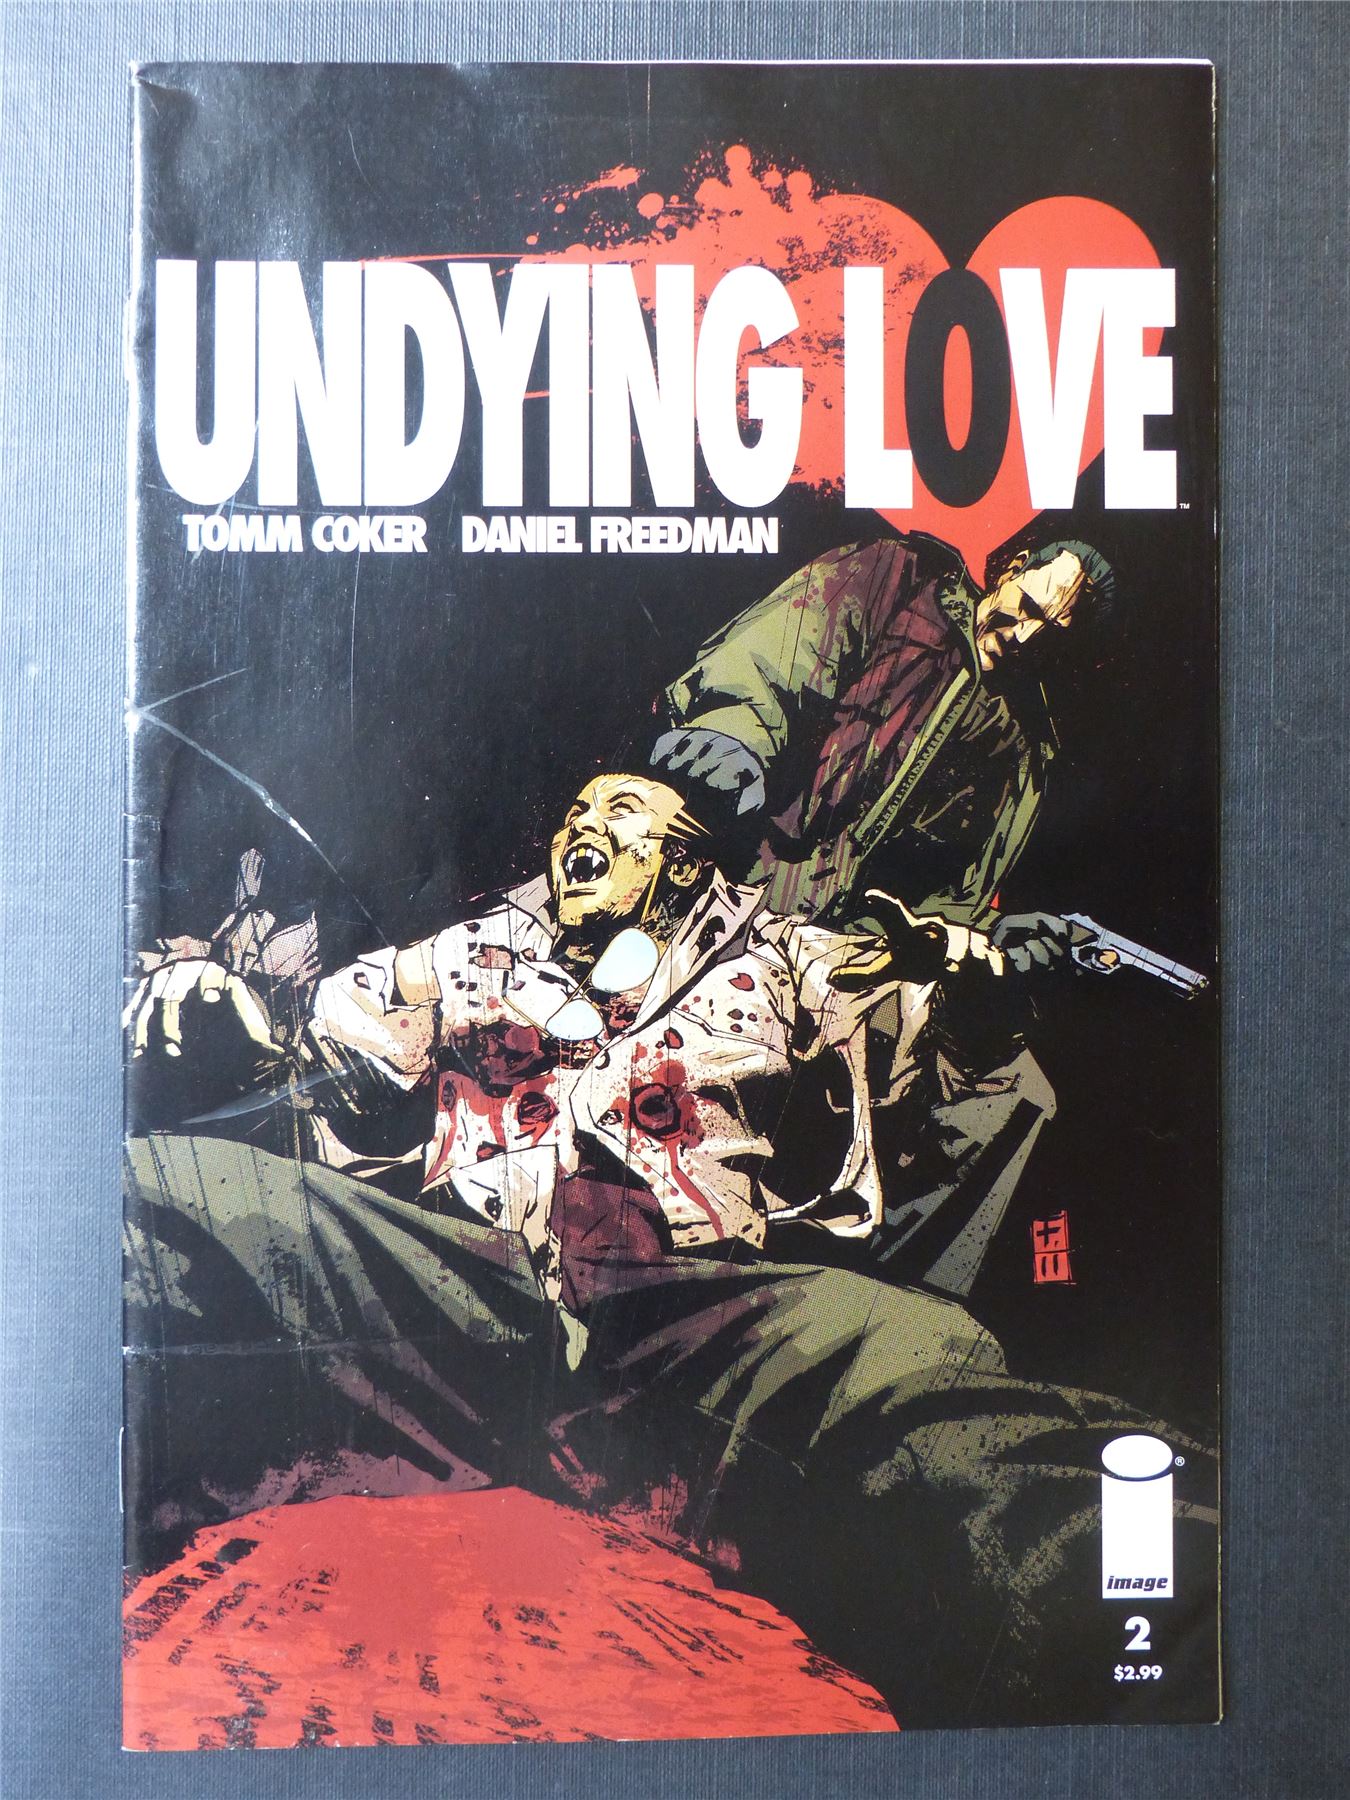 UNDYING Love #2 - Image Comics #222